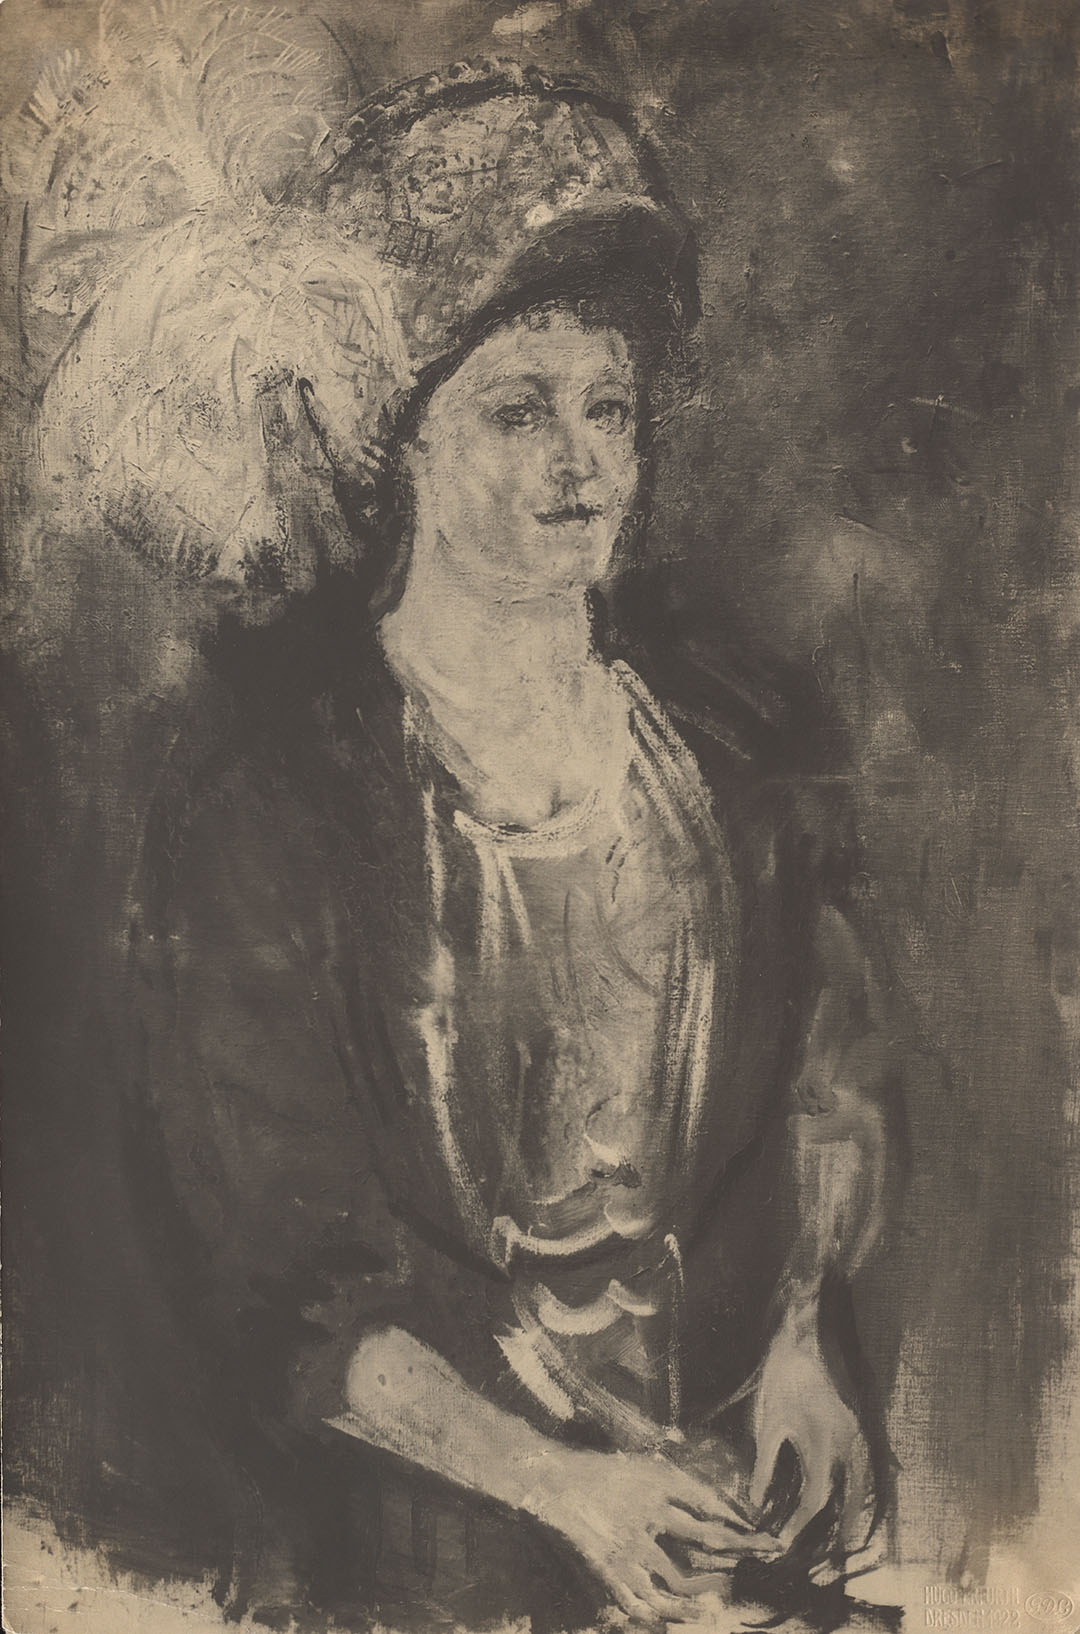 Shortly before or after his trip to Switzerland in 1910, Kokoschka embarked on his “Woman with a Feather Hat”. This photograph from the documentation on the work shows the portrait, which was reworked in around 1922, in an earlier state (ZBZ, estate of O. Kokoschka 802 / image: © Fondation Oskar Kokoschka / 2021, ProLitteris)